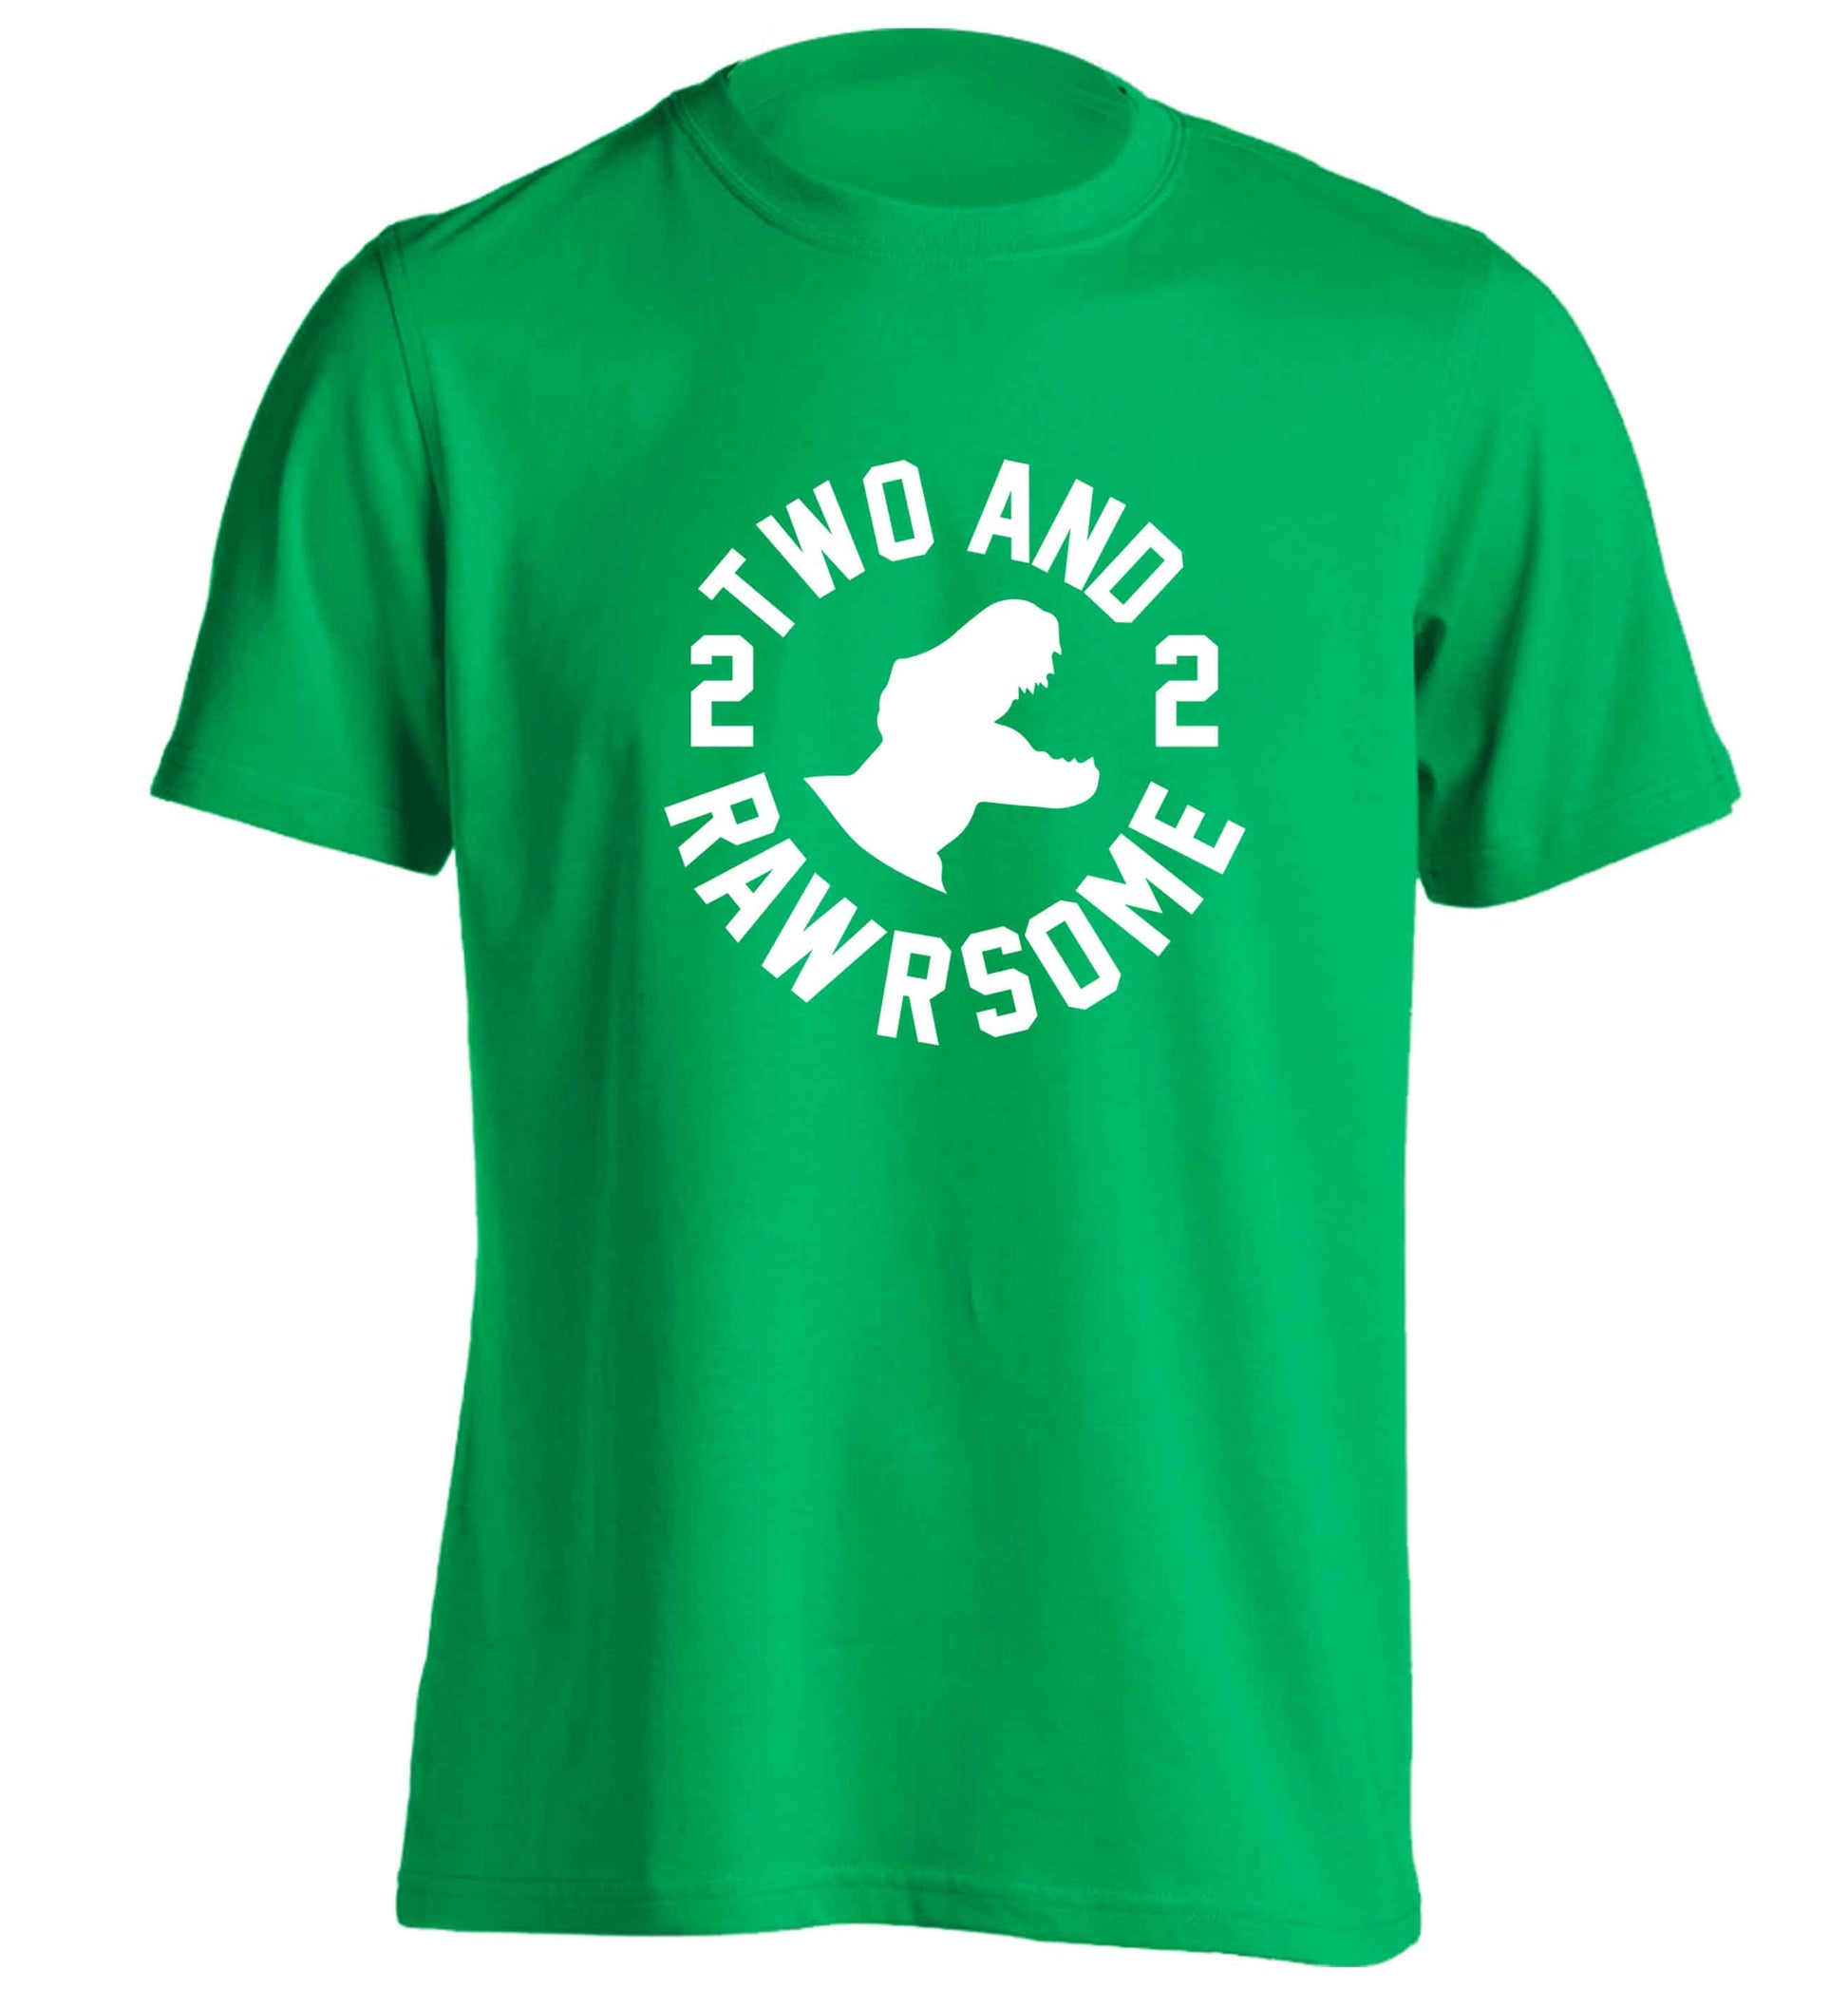 Two and rawrsome adults unisex green Tshirt 2XL